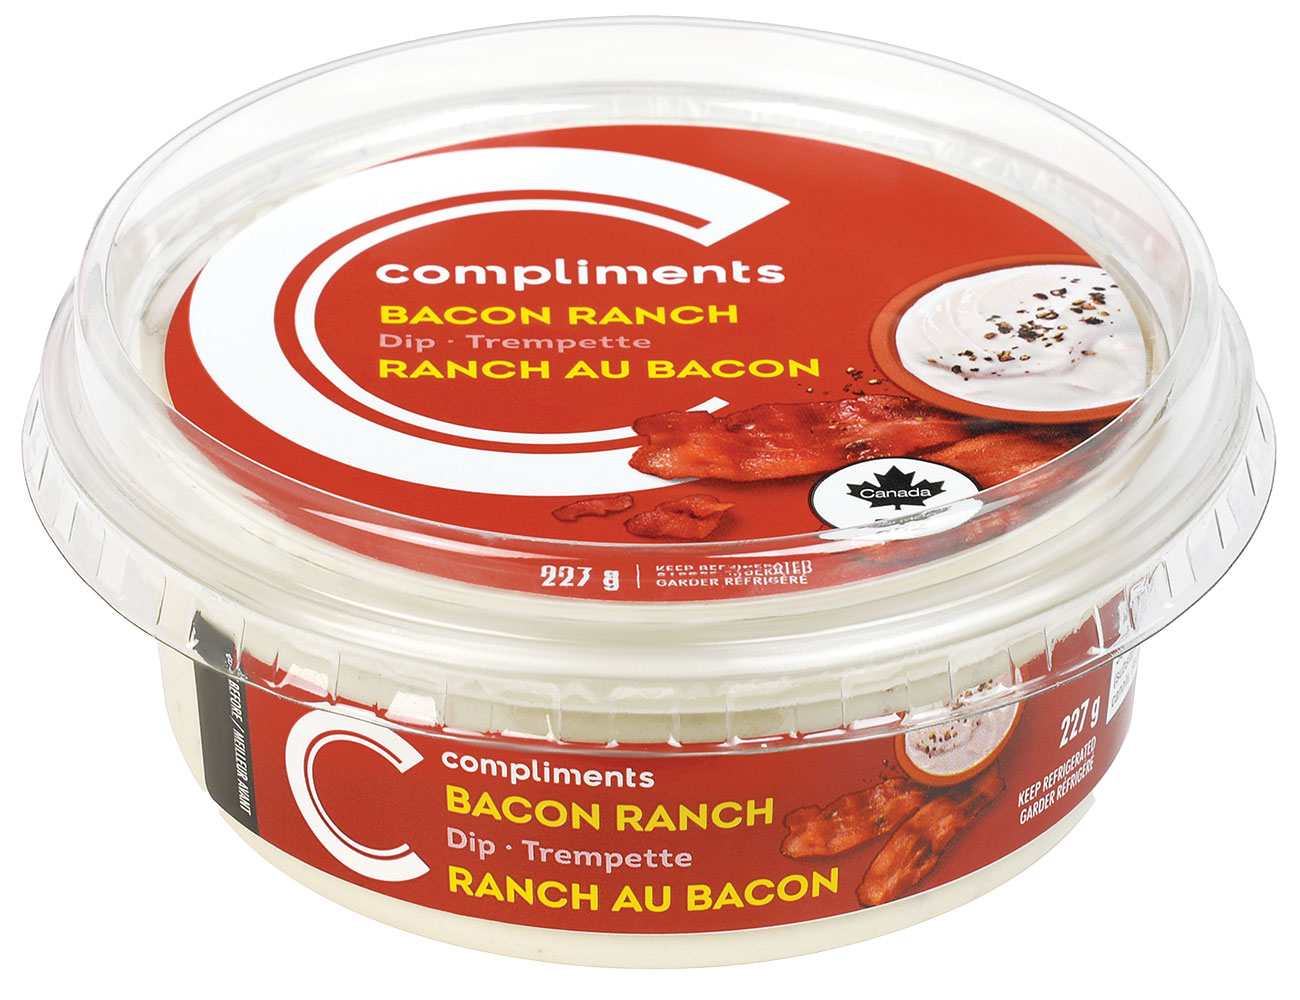 Plastic dip container of Compliments Bacon-Ranch Dip on white background